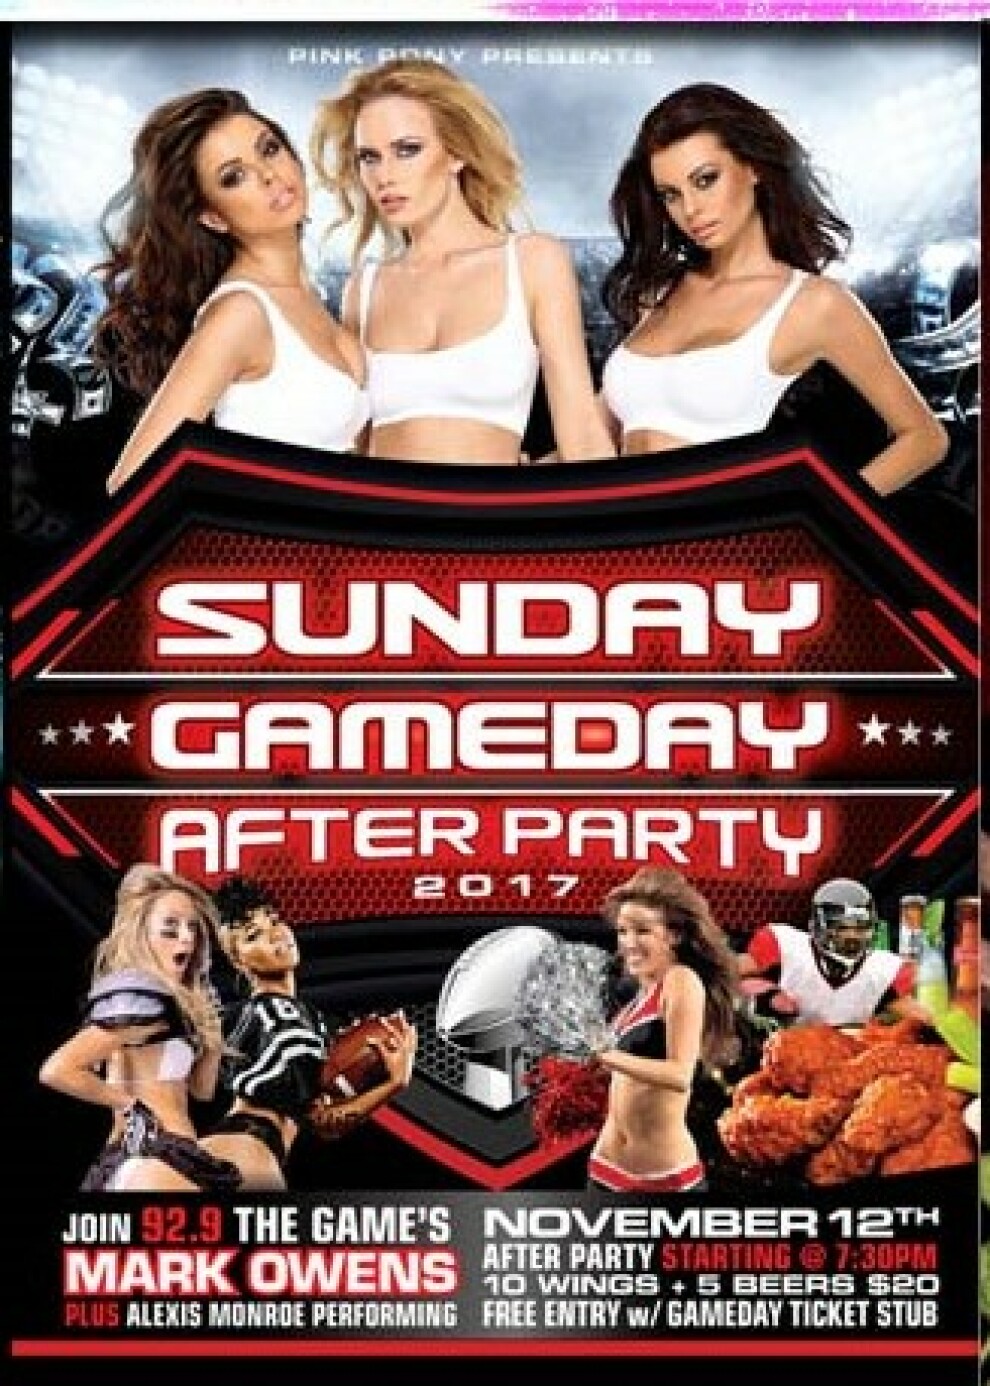 Sunday Gameday After Party